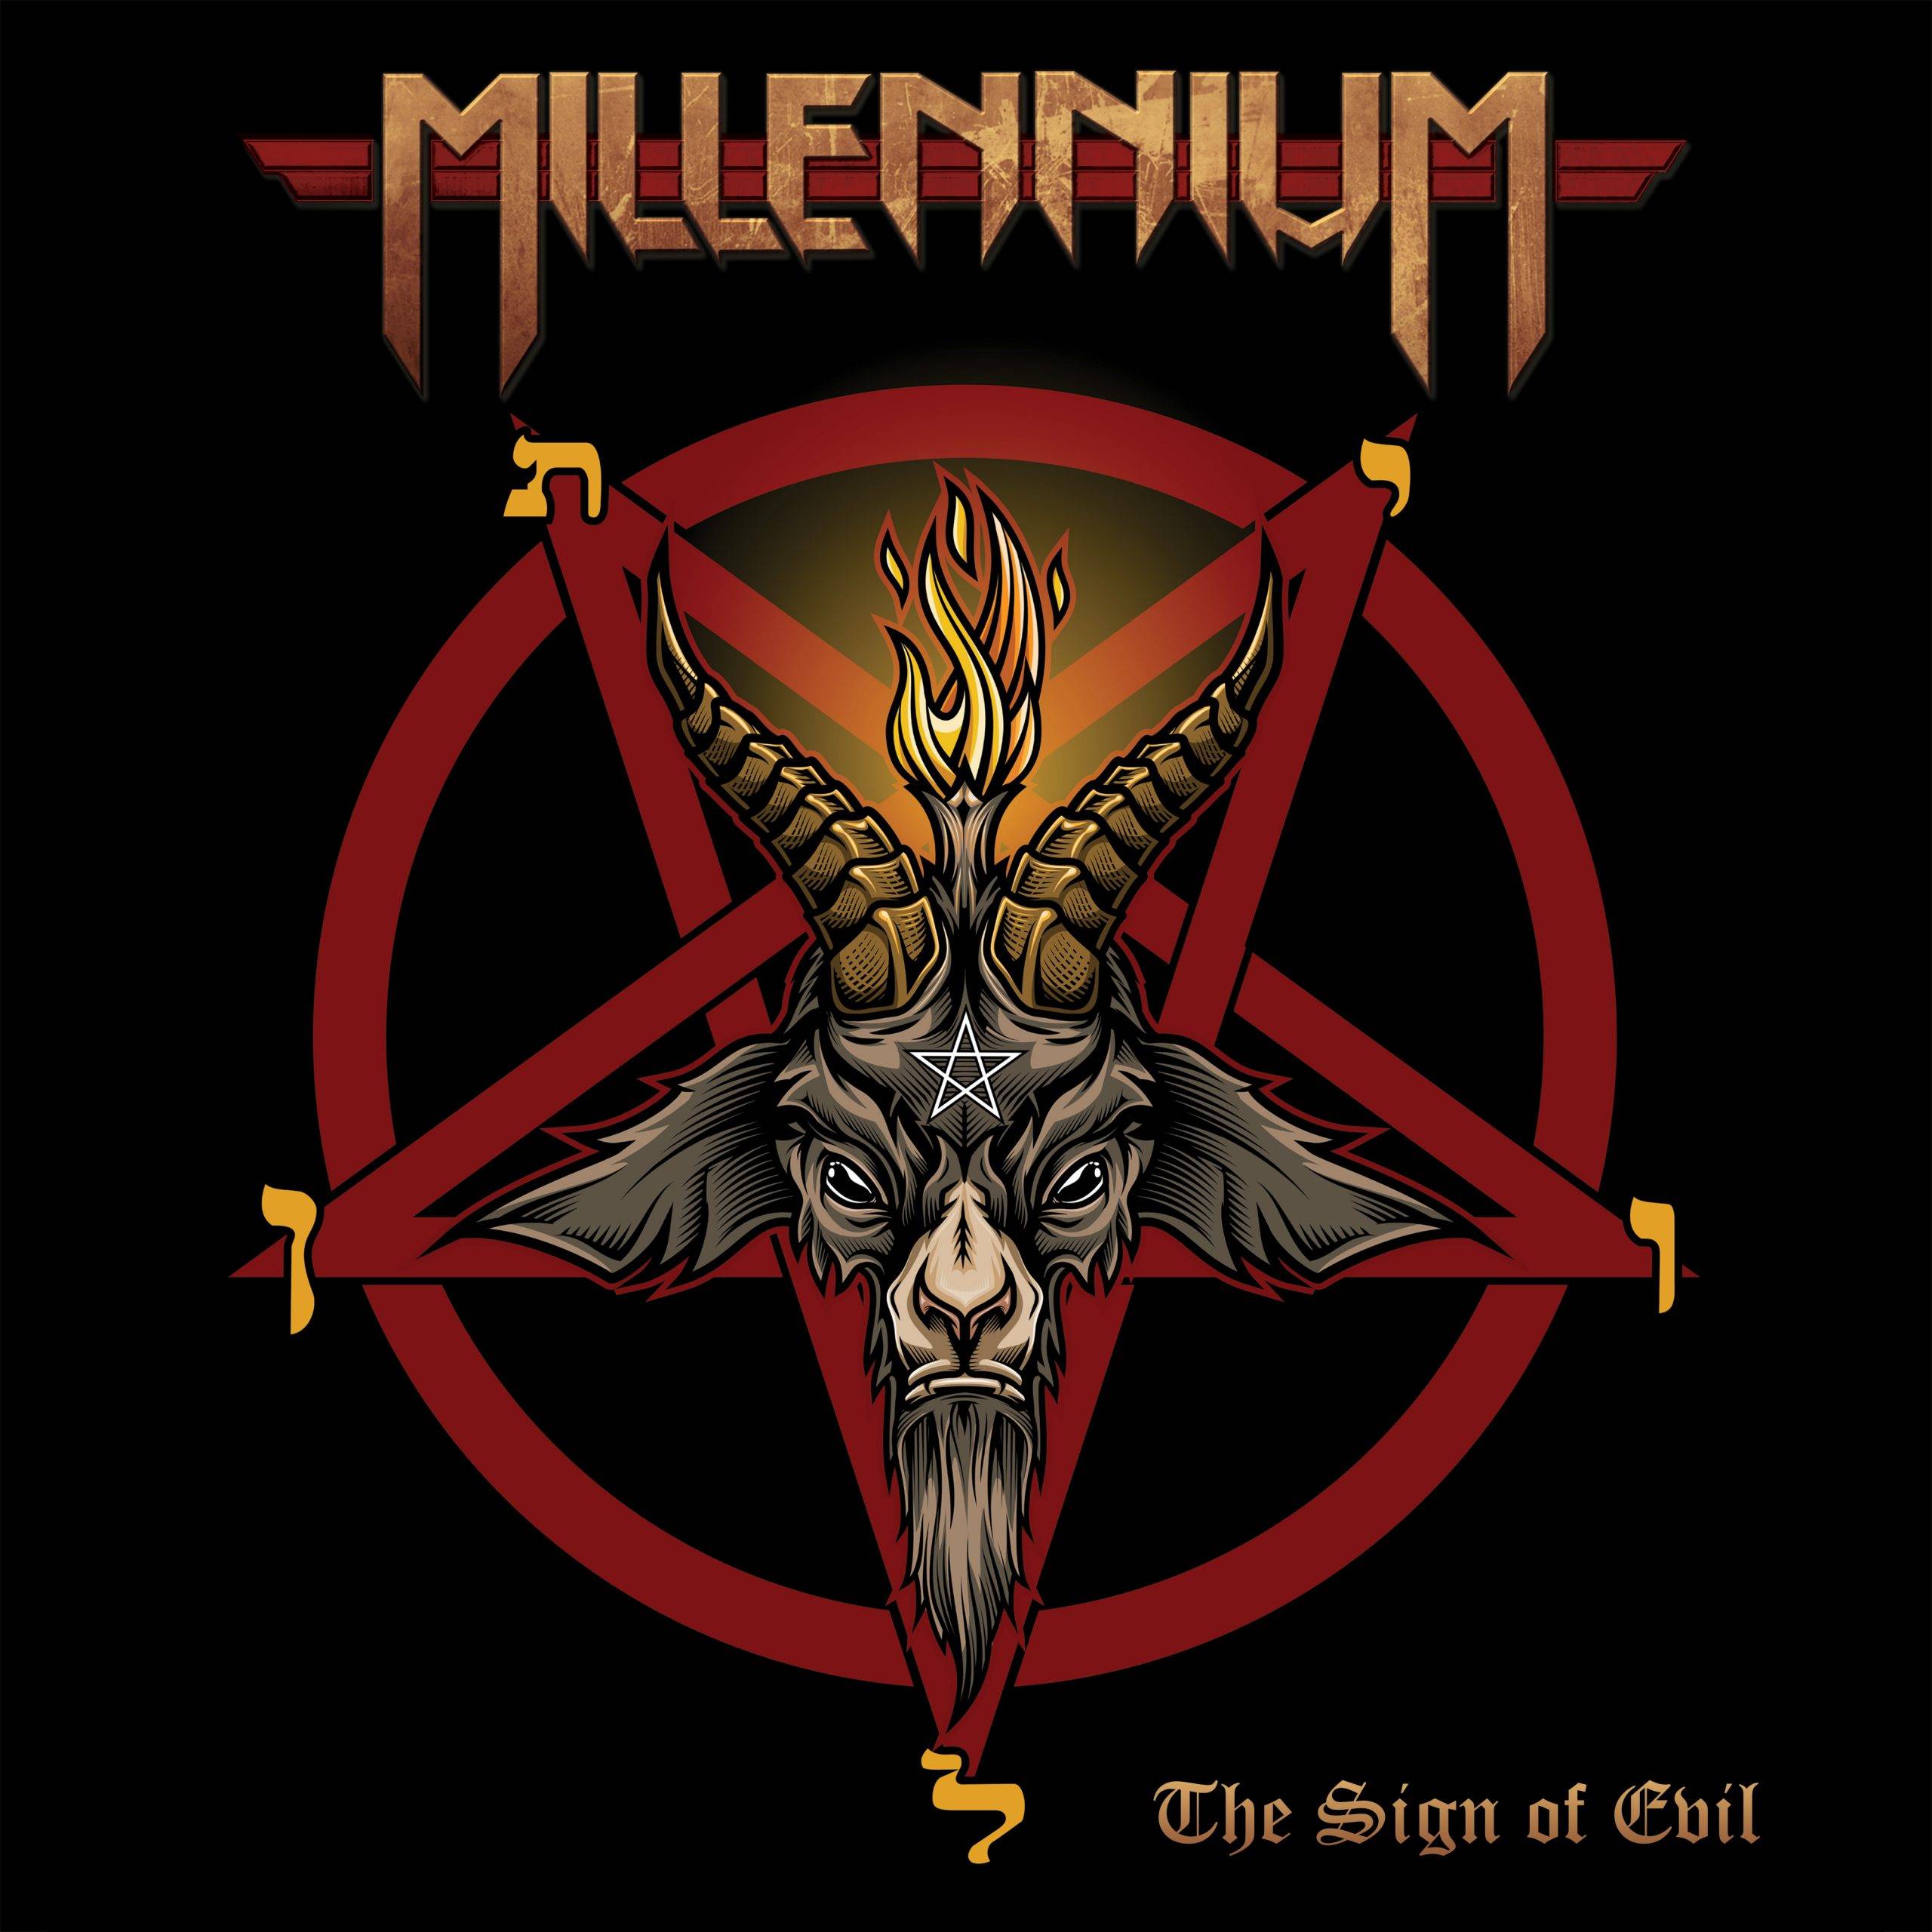 Millennium: "The Sign of Evil' CD and LP 19th May No Remorse Records.